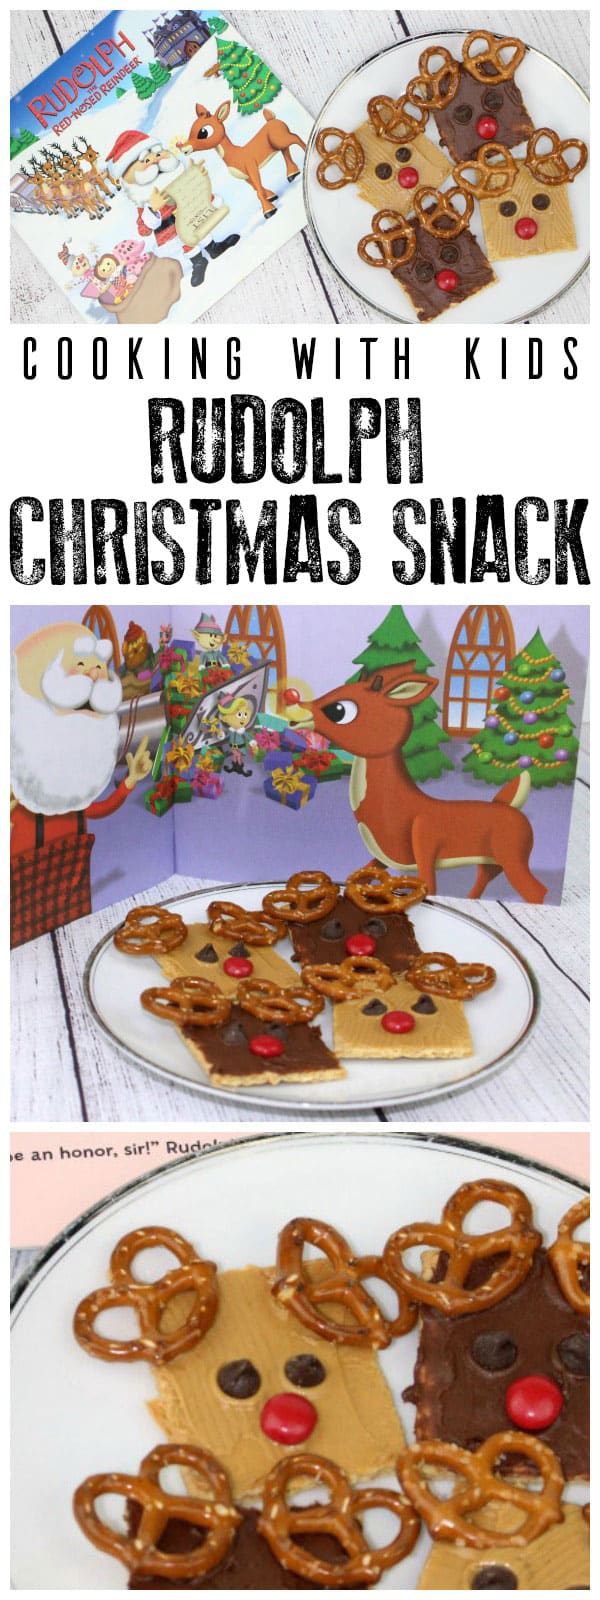 No-cook snacks inspired by the song and story of Rudolph the Red-Nosed Reindeer ideal to make with and for kids this Christmas.